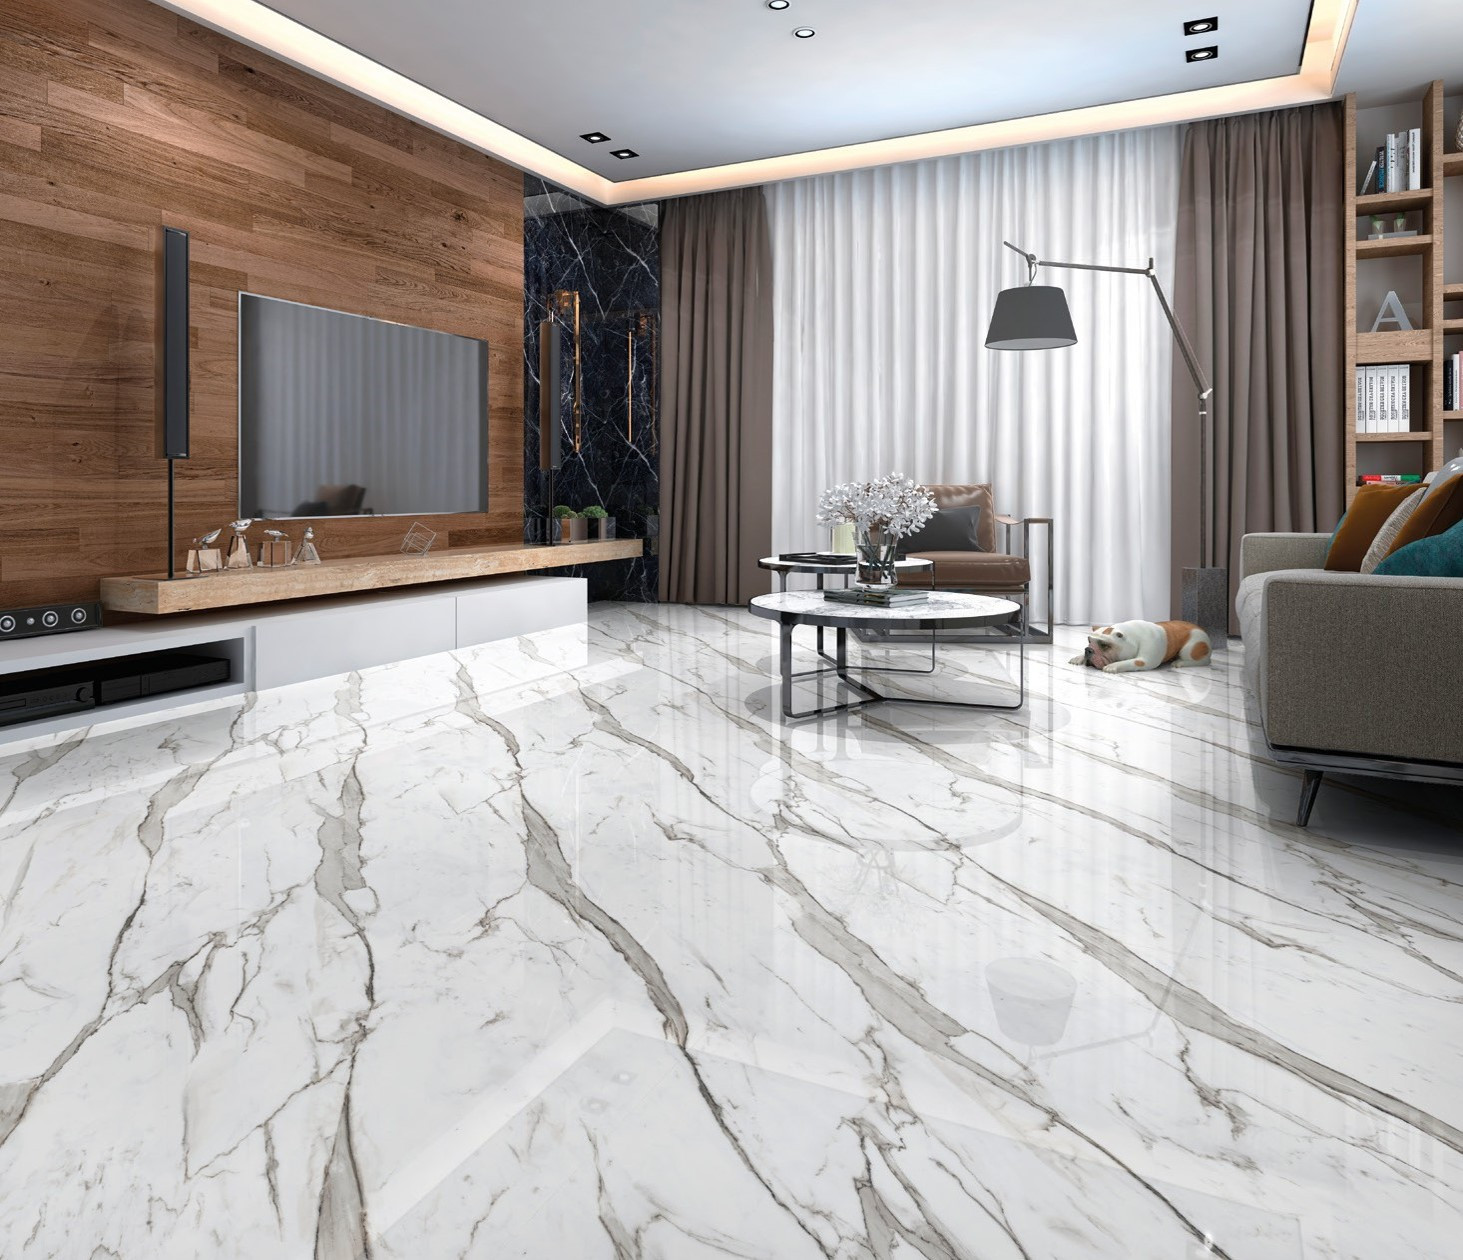 Porcelain stoneware with Polished Polished Polished Marble effect Statuary with continuous vein 60x120 cm
